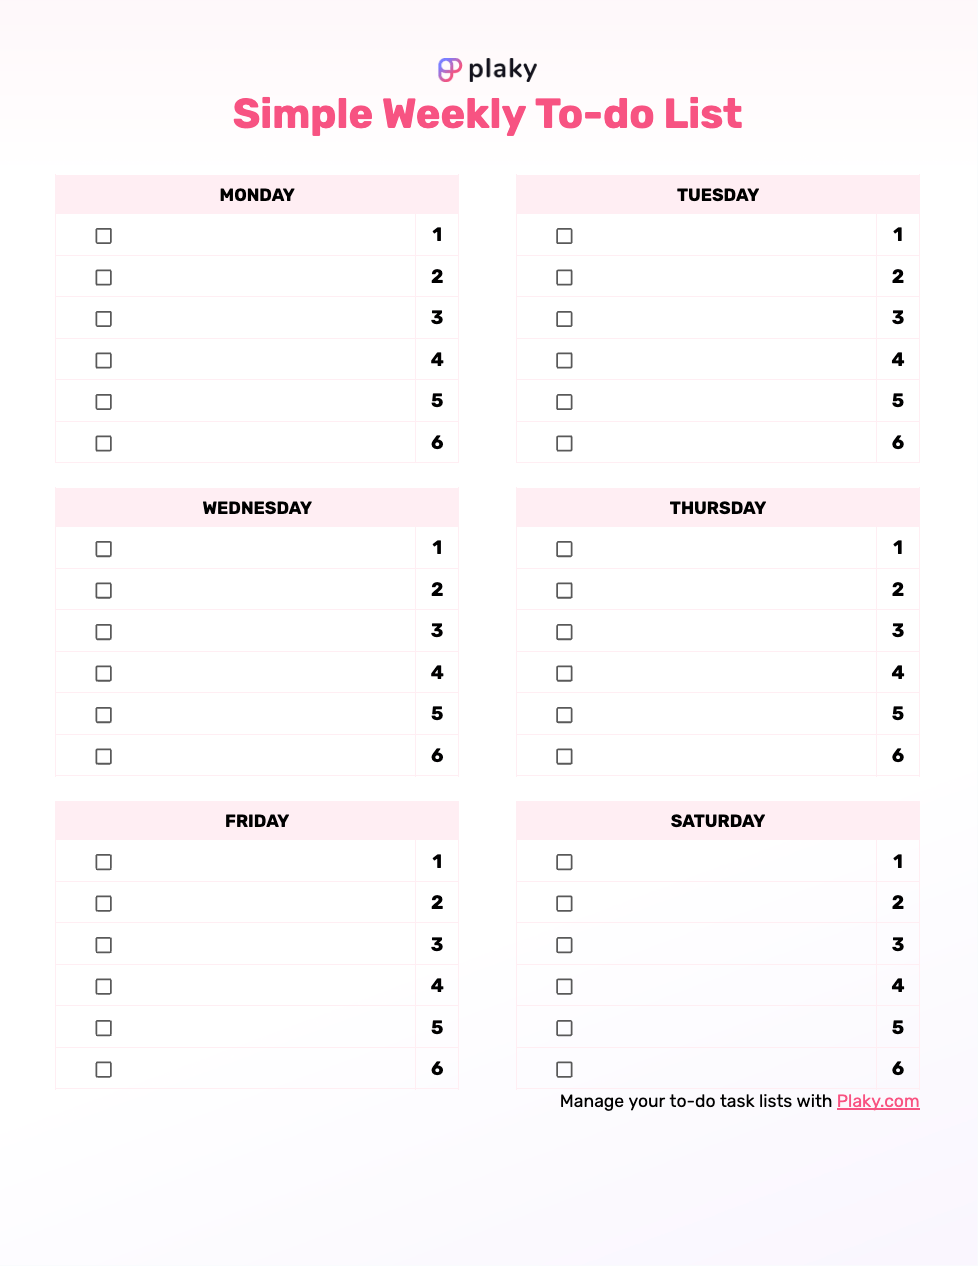 Simple weekly to-do list template